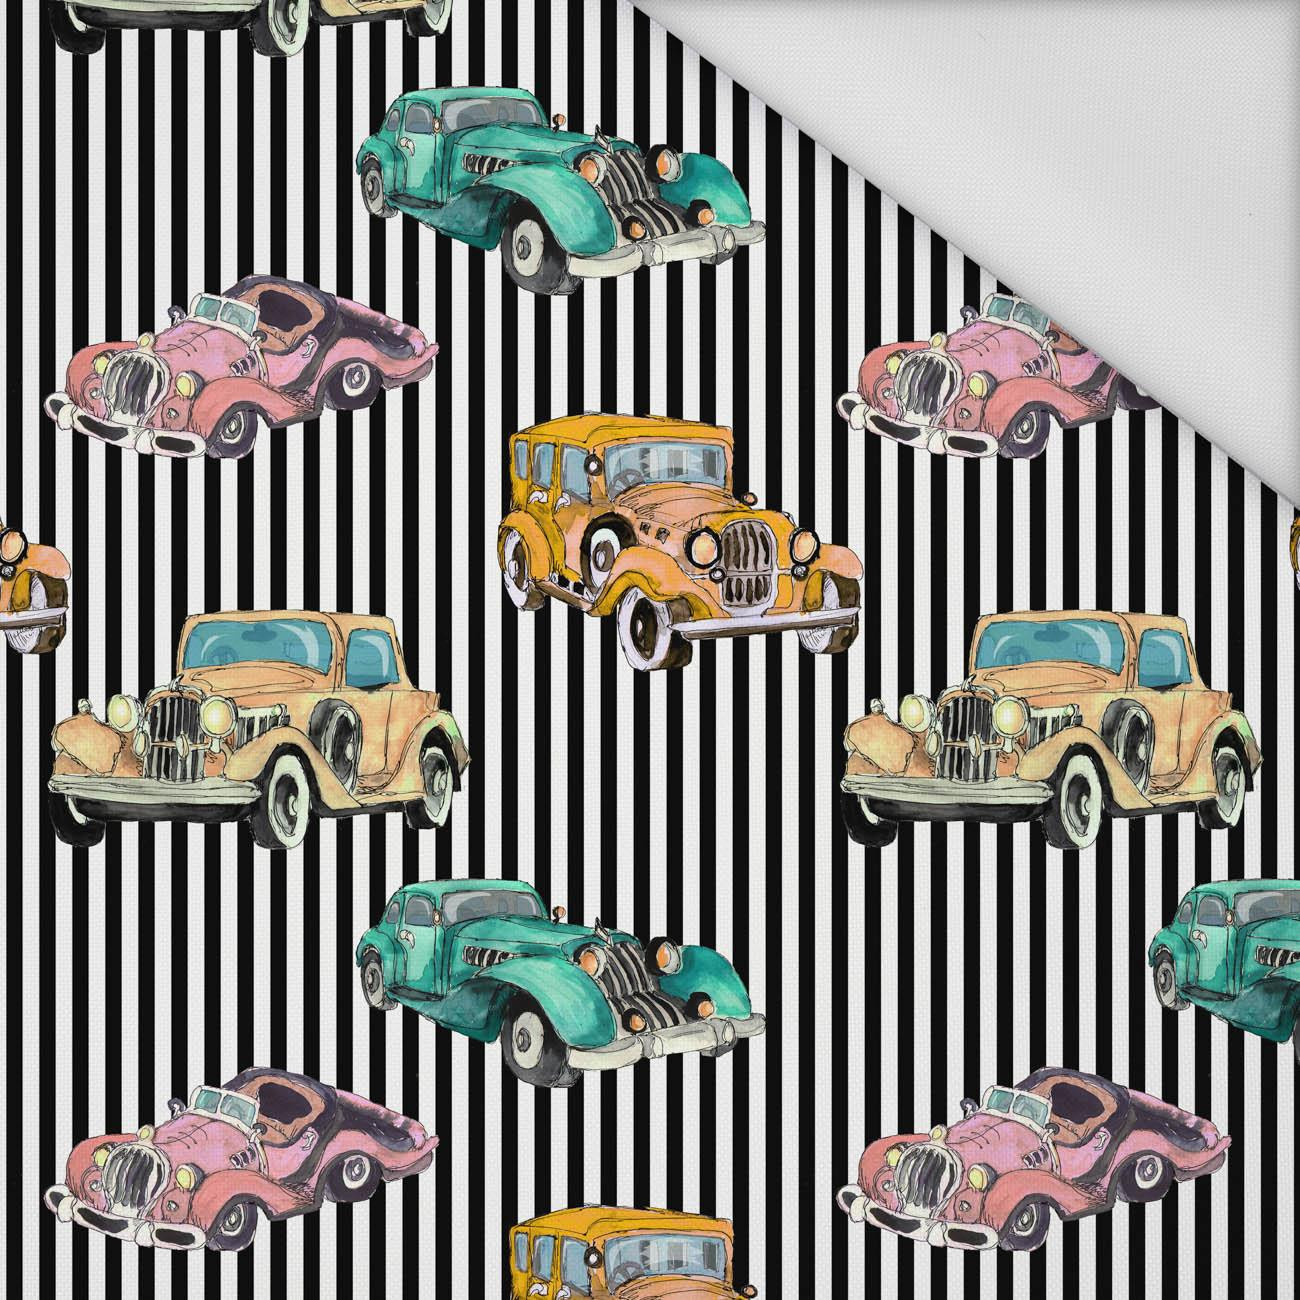 OLD CARS / STRIPES pat. 3 - Waterproof woven fabric